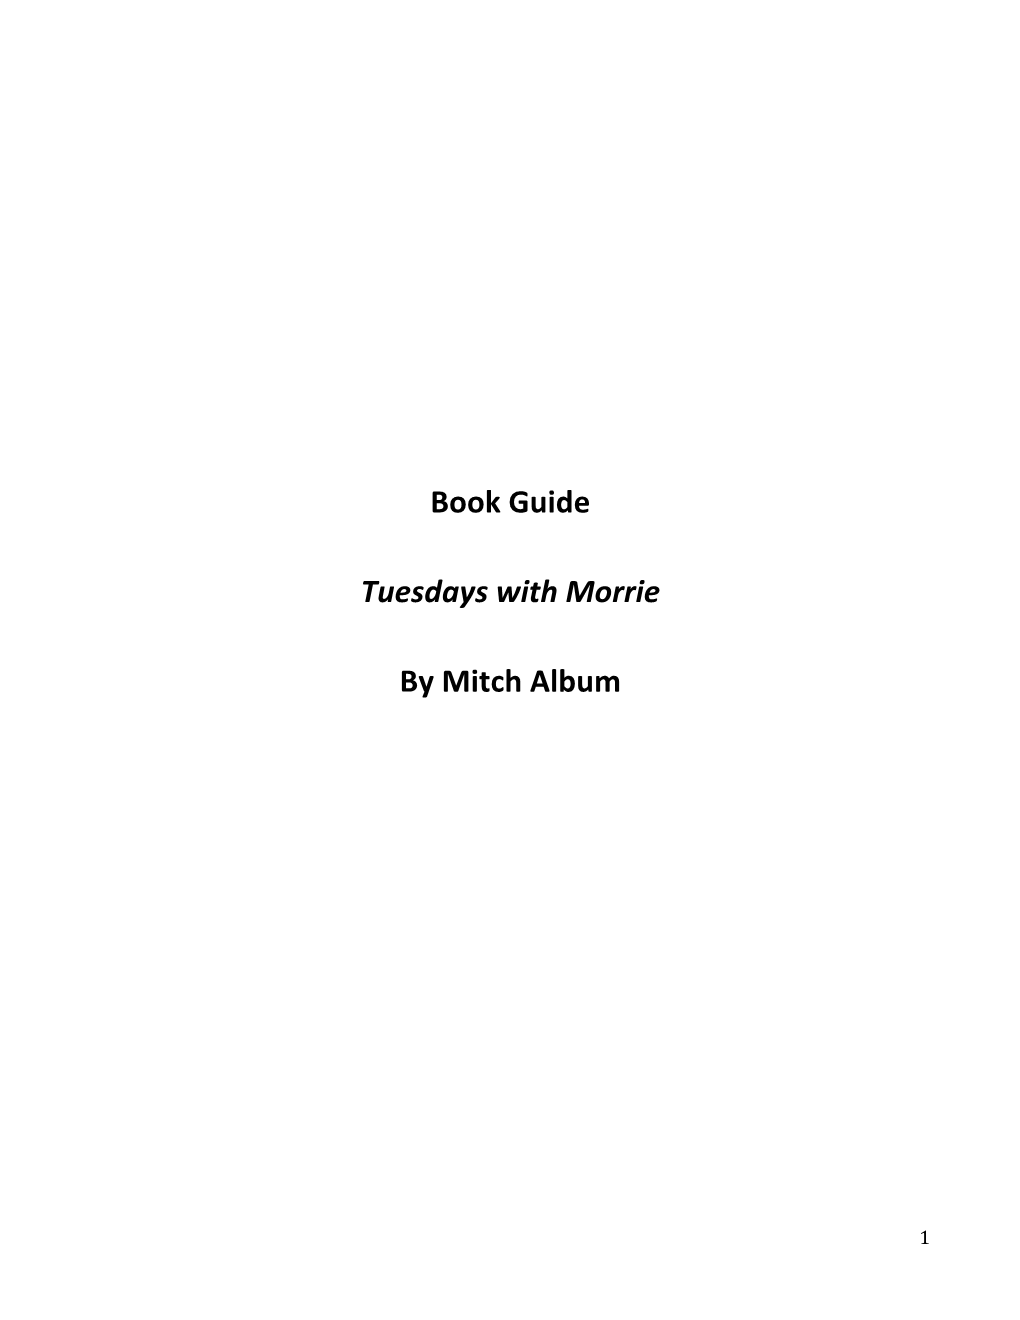 Book Guide Tuesdays with Morrie by Mitch Album